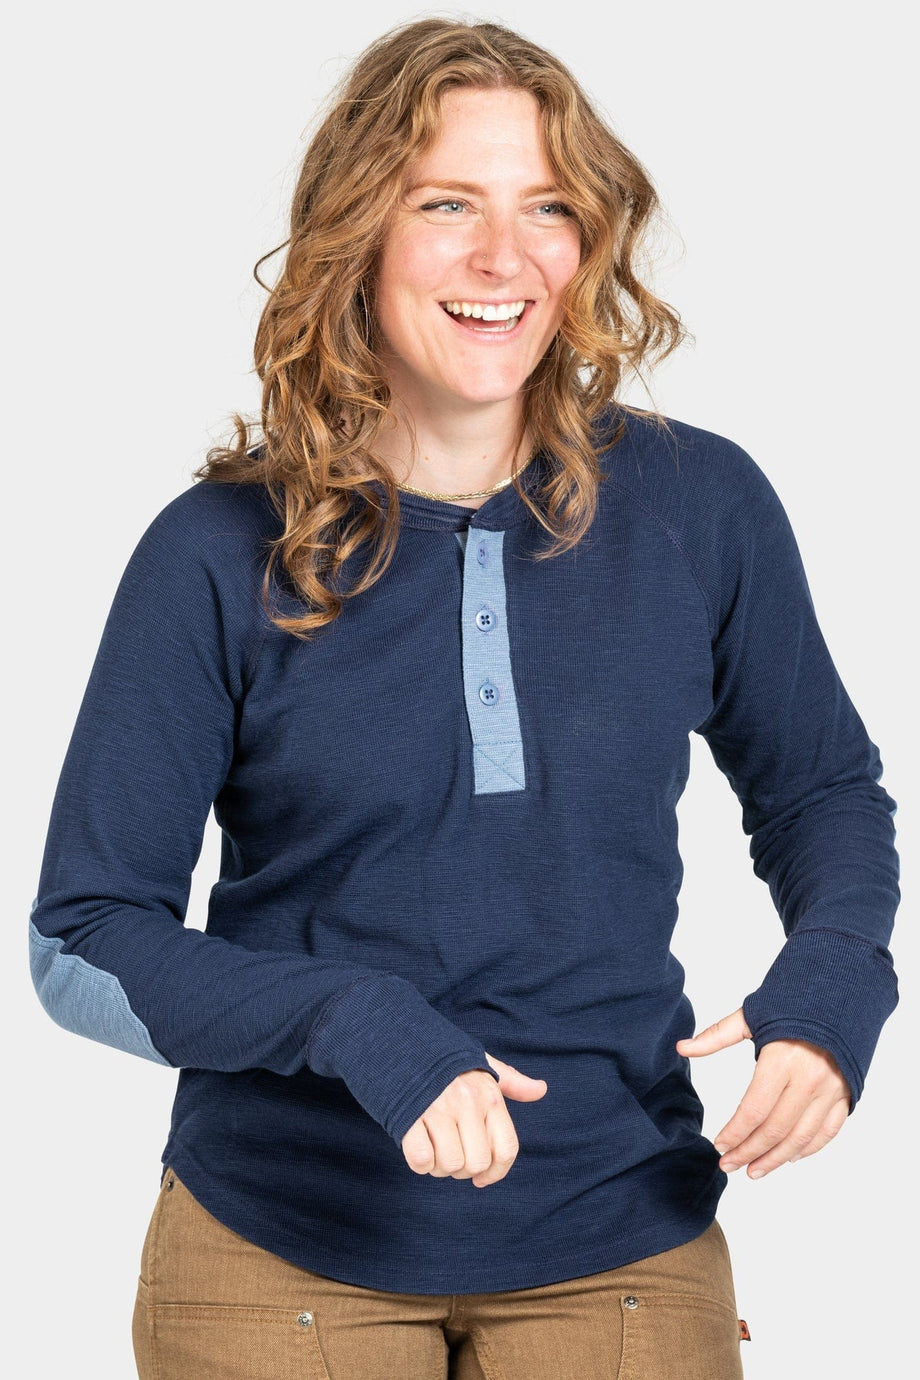 Women's Rugged Thermal Henley